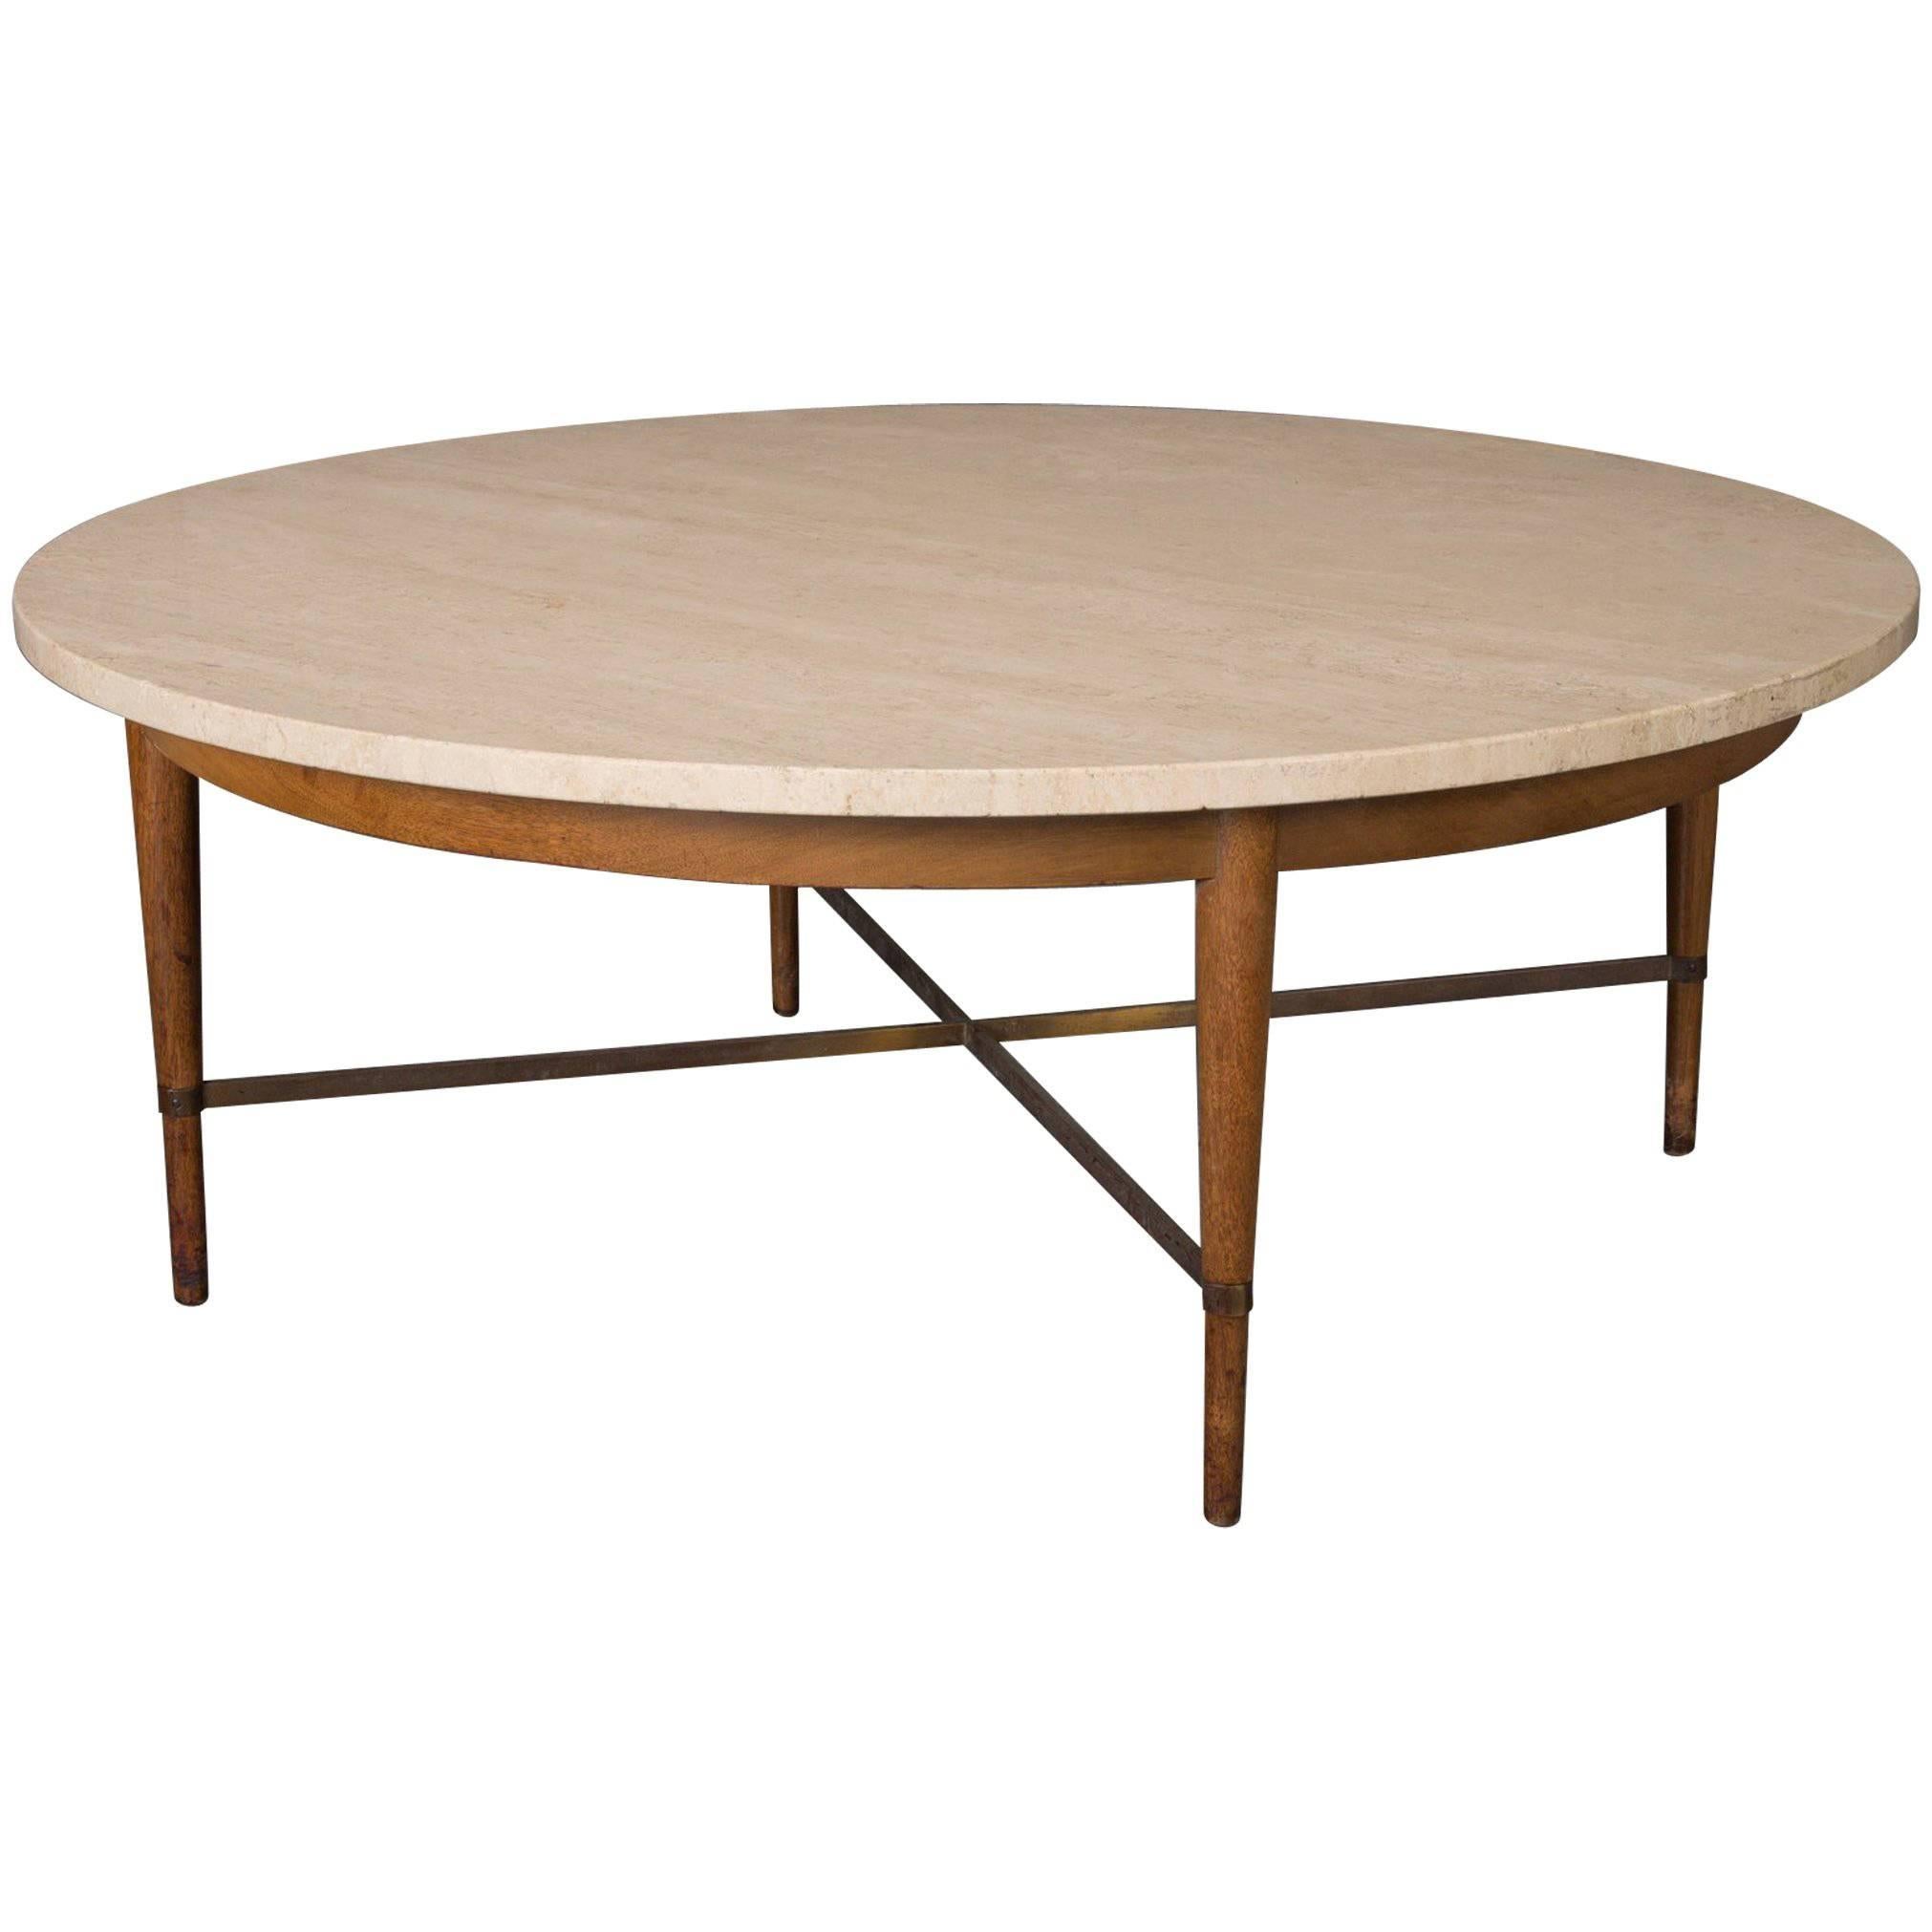 Round Travertine Cocktail Table by Paul McCobb for the Connoisseur Collection